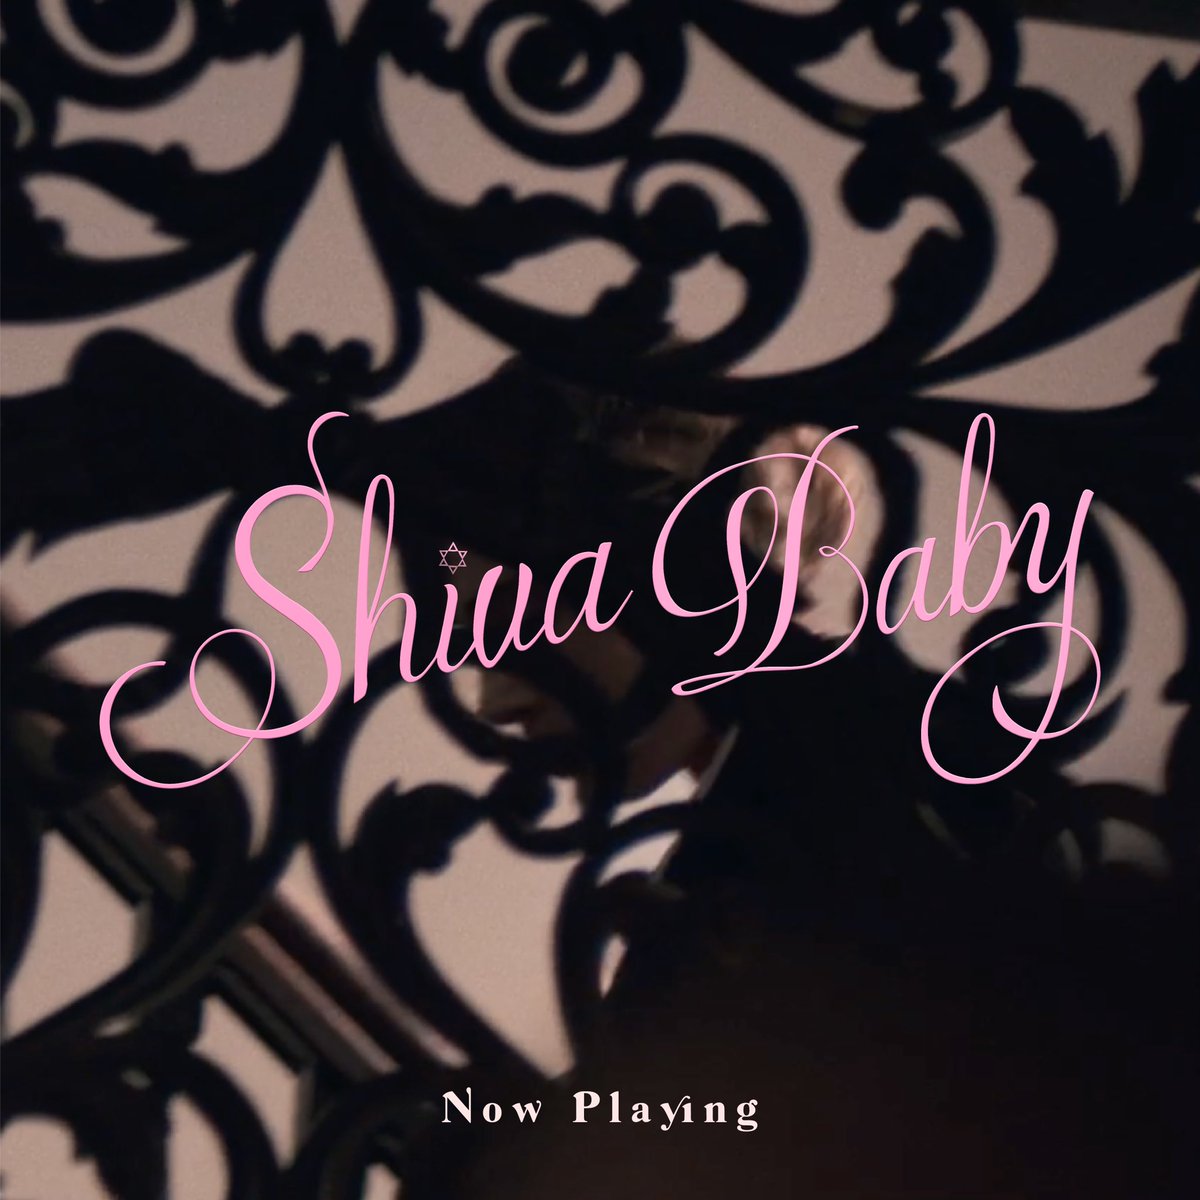 Every day we wake up and do our silly little tasks.. but not today. TODAY is SHIVA BABY RELEASE DAY! Get in shiva babies and sugar daddies, we’re going to the movies—or @AppleTV or @Altavod 🥯 linktr.ee/ShivaBaby